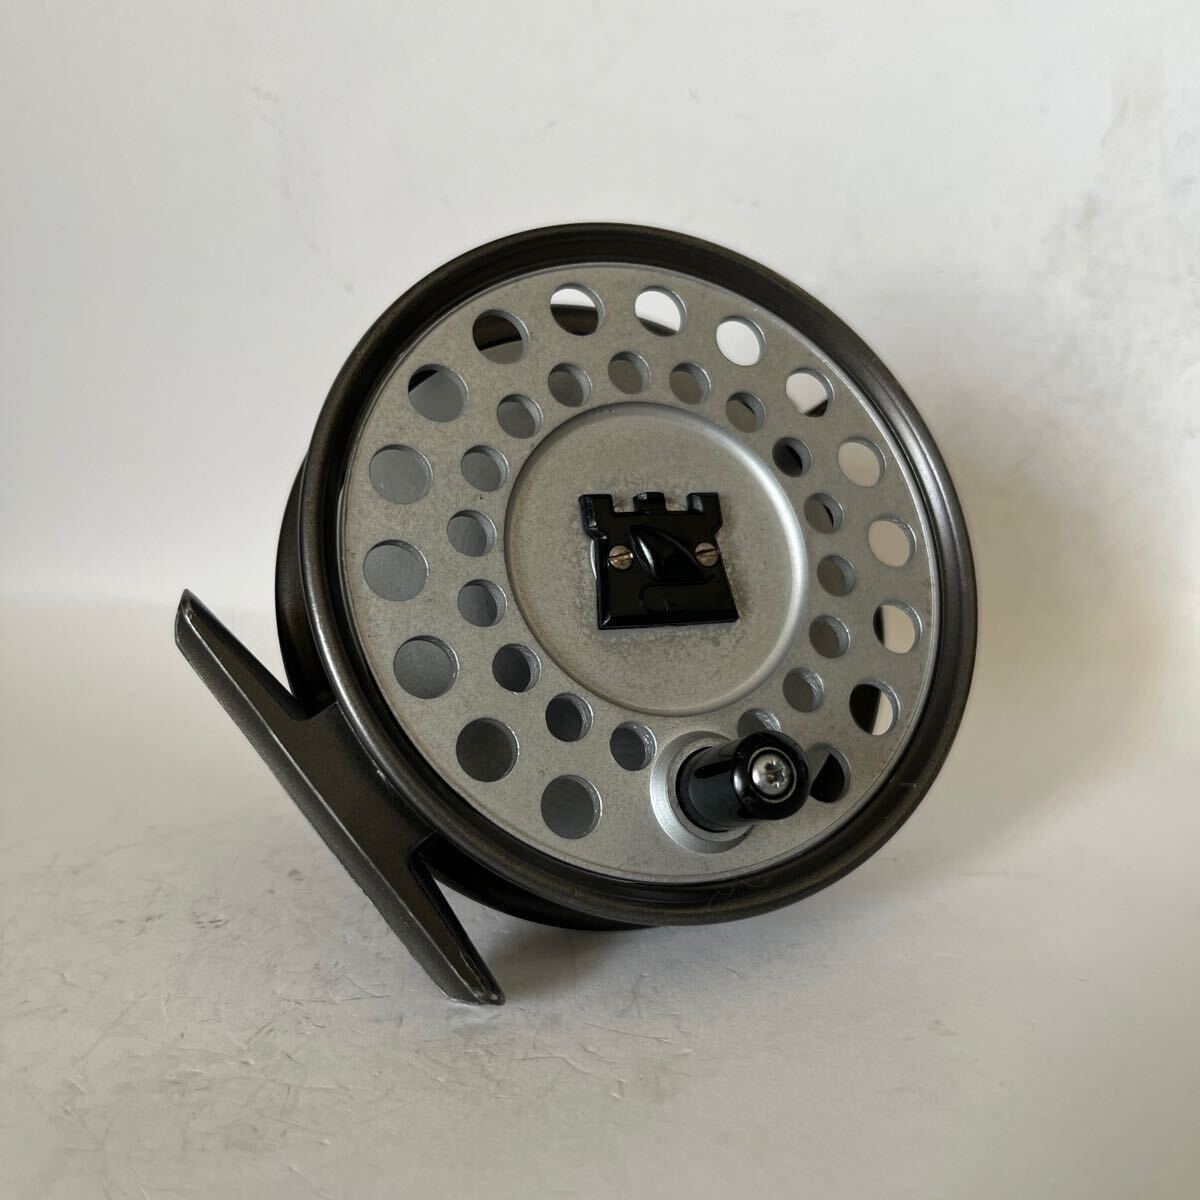 Vintage “The Viscount 140” Fly Fishing Reel Made by Hardy Bros Ltd England 純正ケース付の画像5